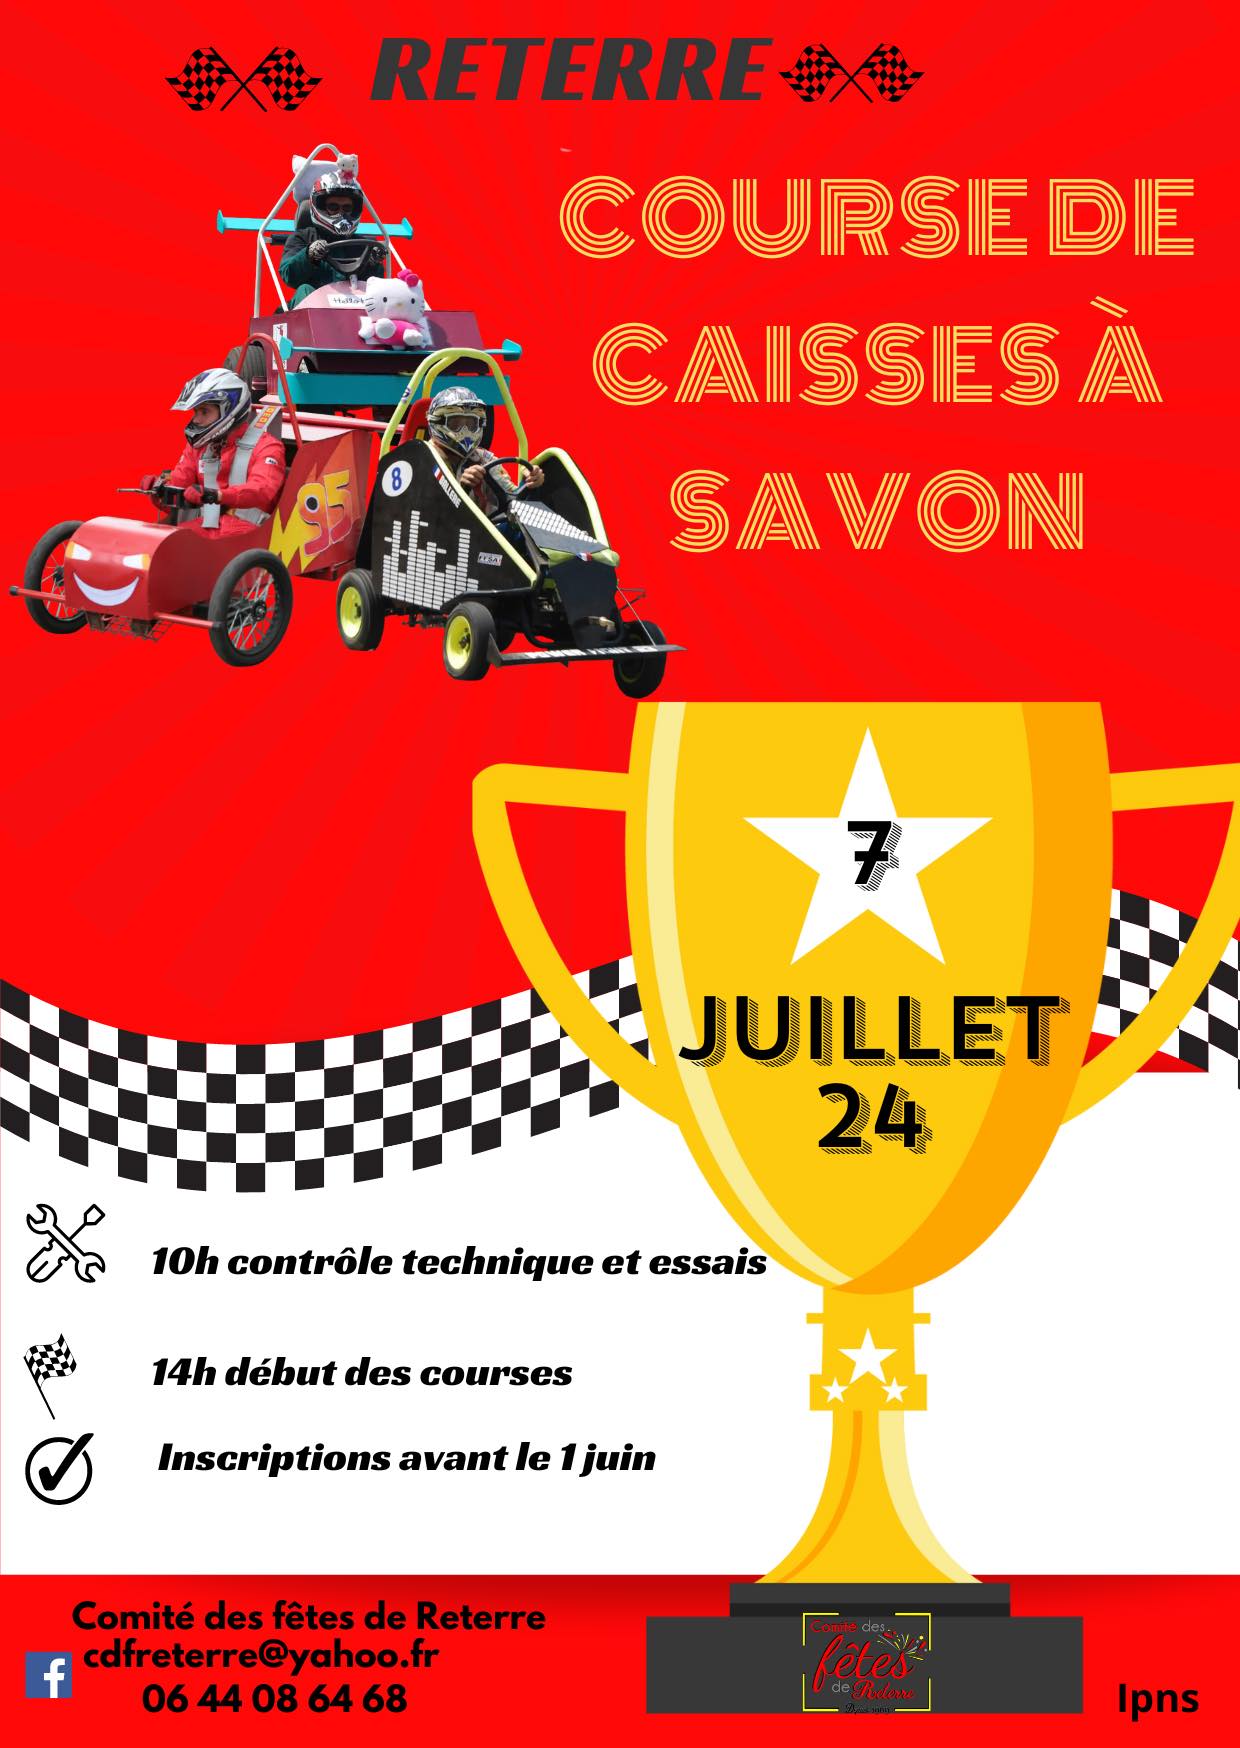 Course de caisses a savon null France null null null null